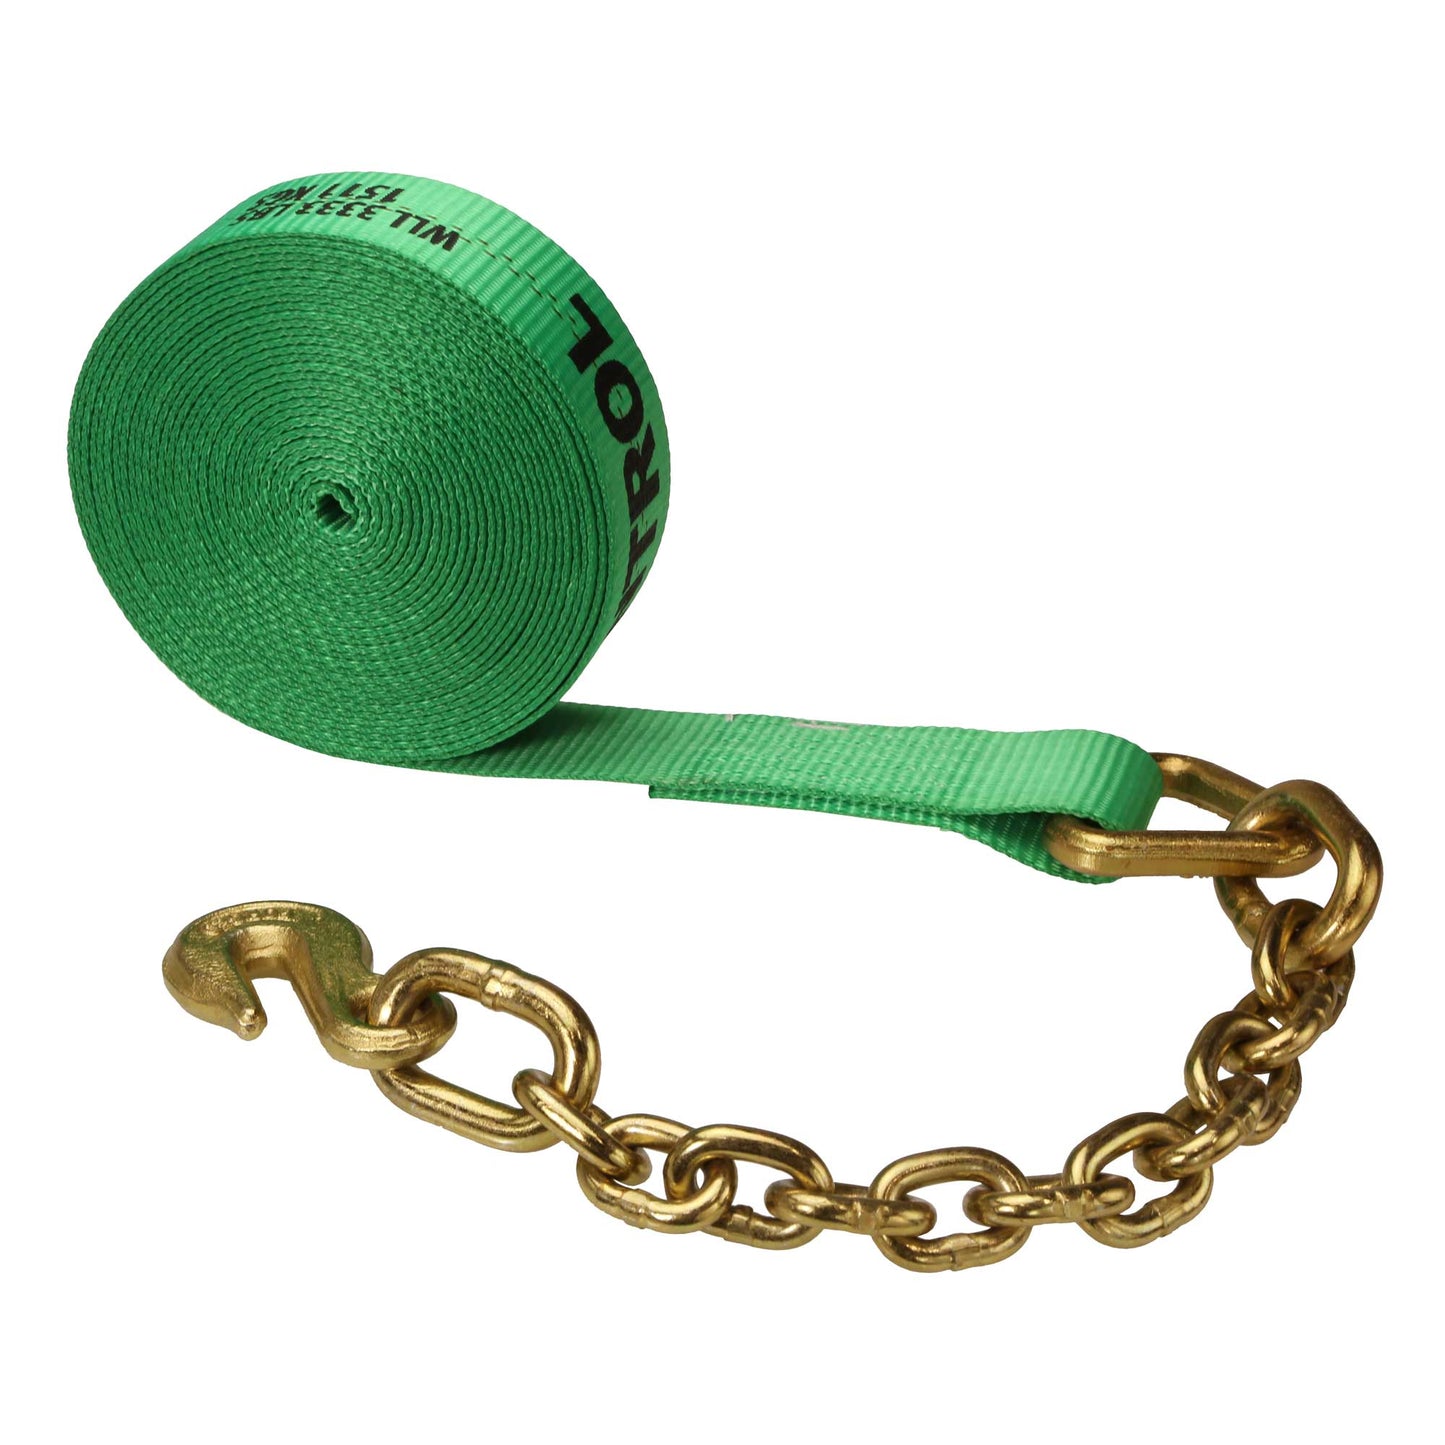 2 inch x 50 foot Winch Strap with Chain Extension